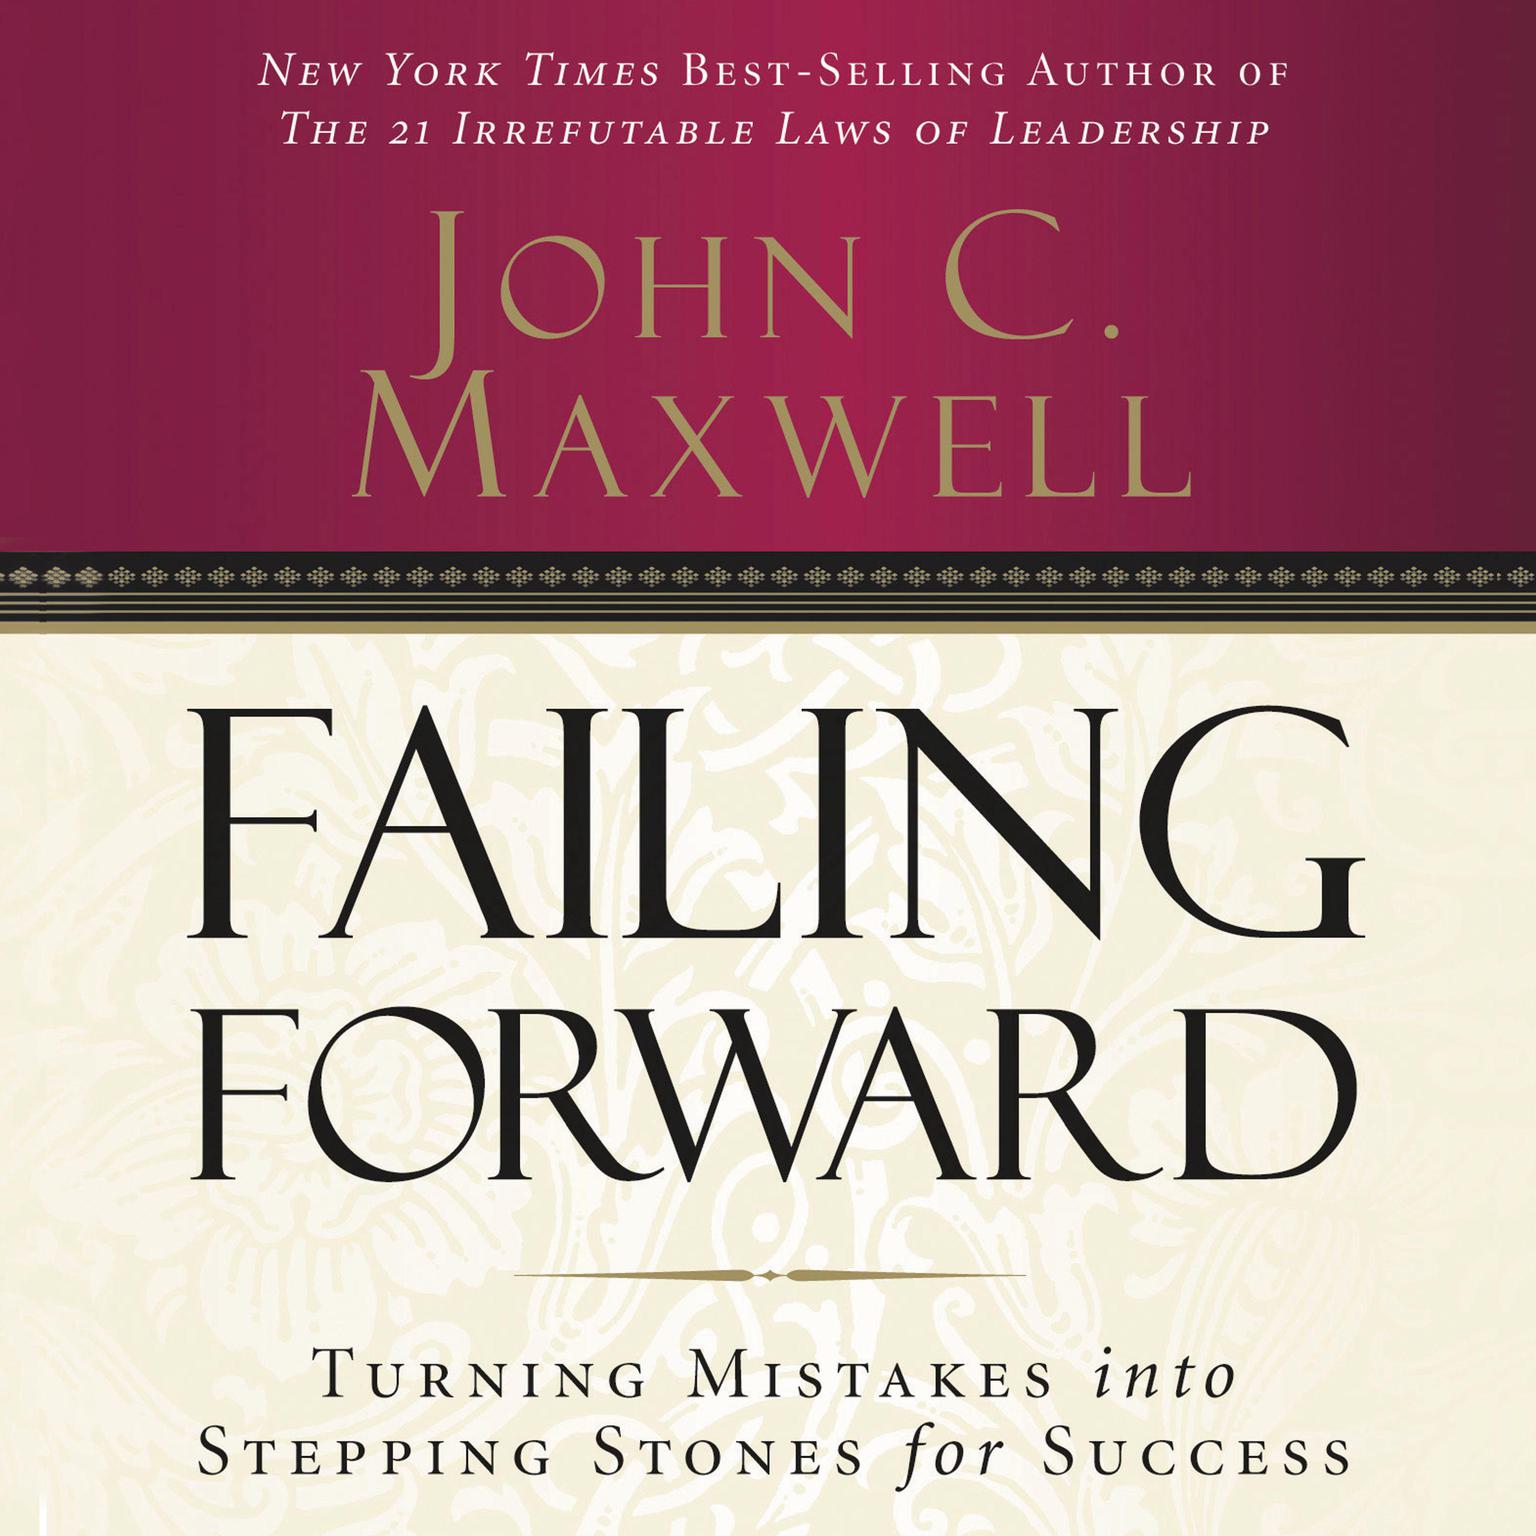 Failing Forward: Turning Mistakes into Stepping Stones for Success Audiobook, by John C. Maxwell